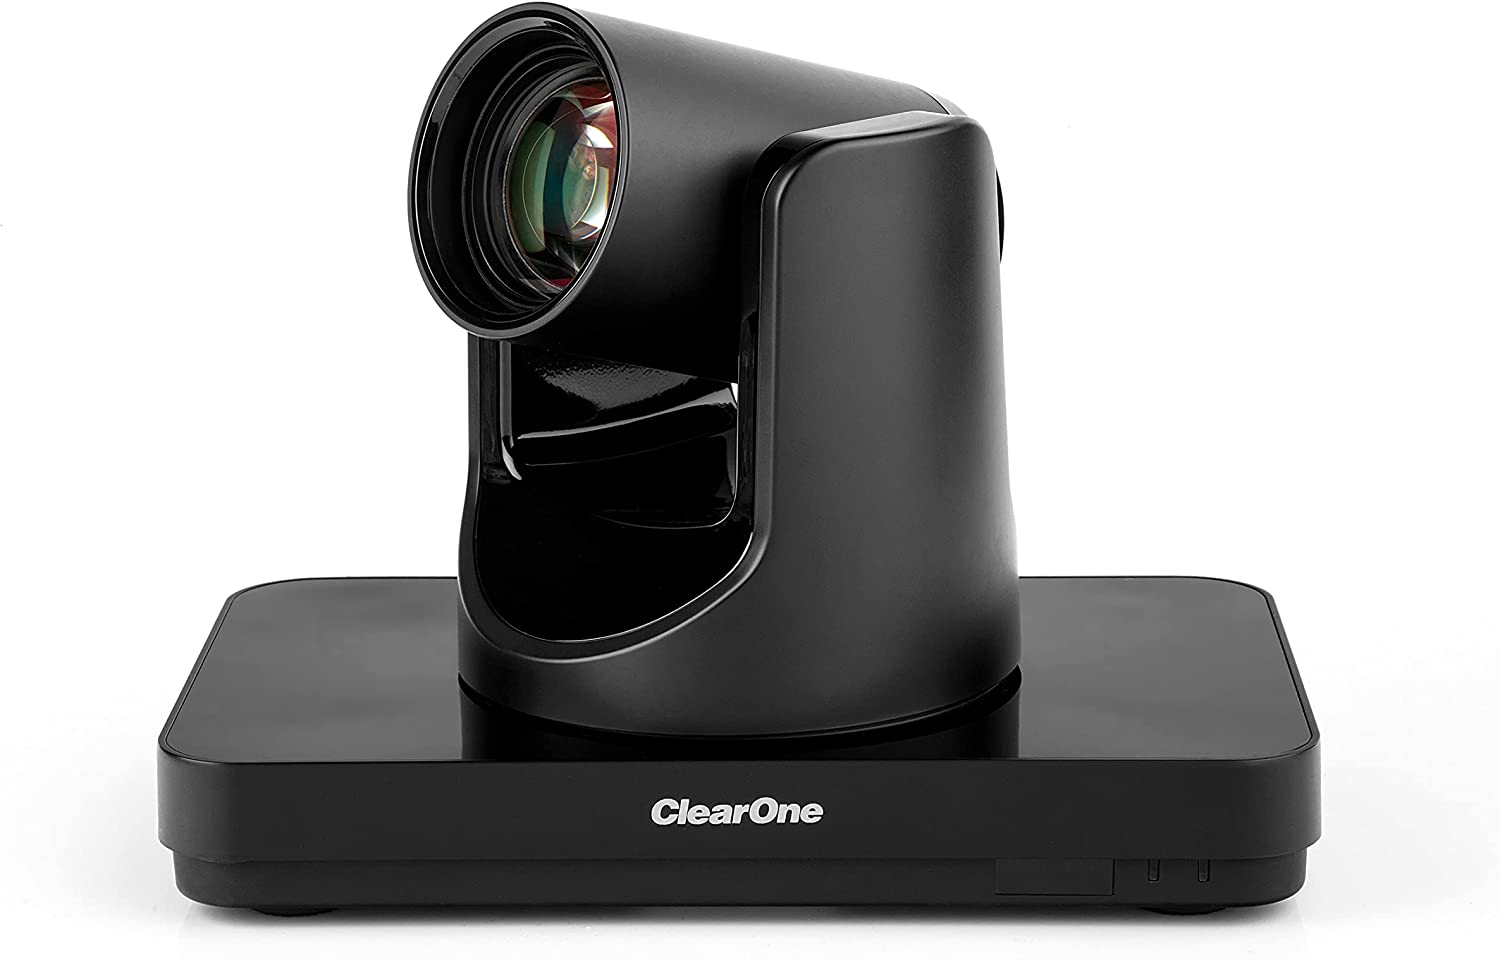 ClearOne Unite 200 Best-in-Class Professional-Grade PTZ Camera. Full HD, 12x Optical Zoom and Wide-Angle Video Capture with Advanced Noise Reduction.